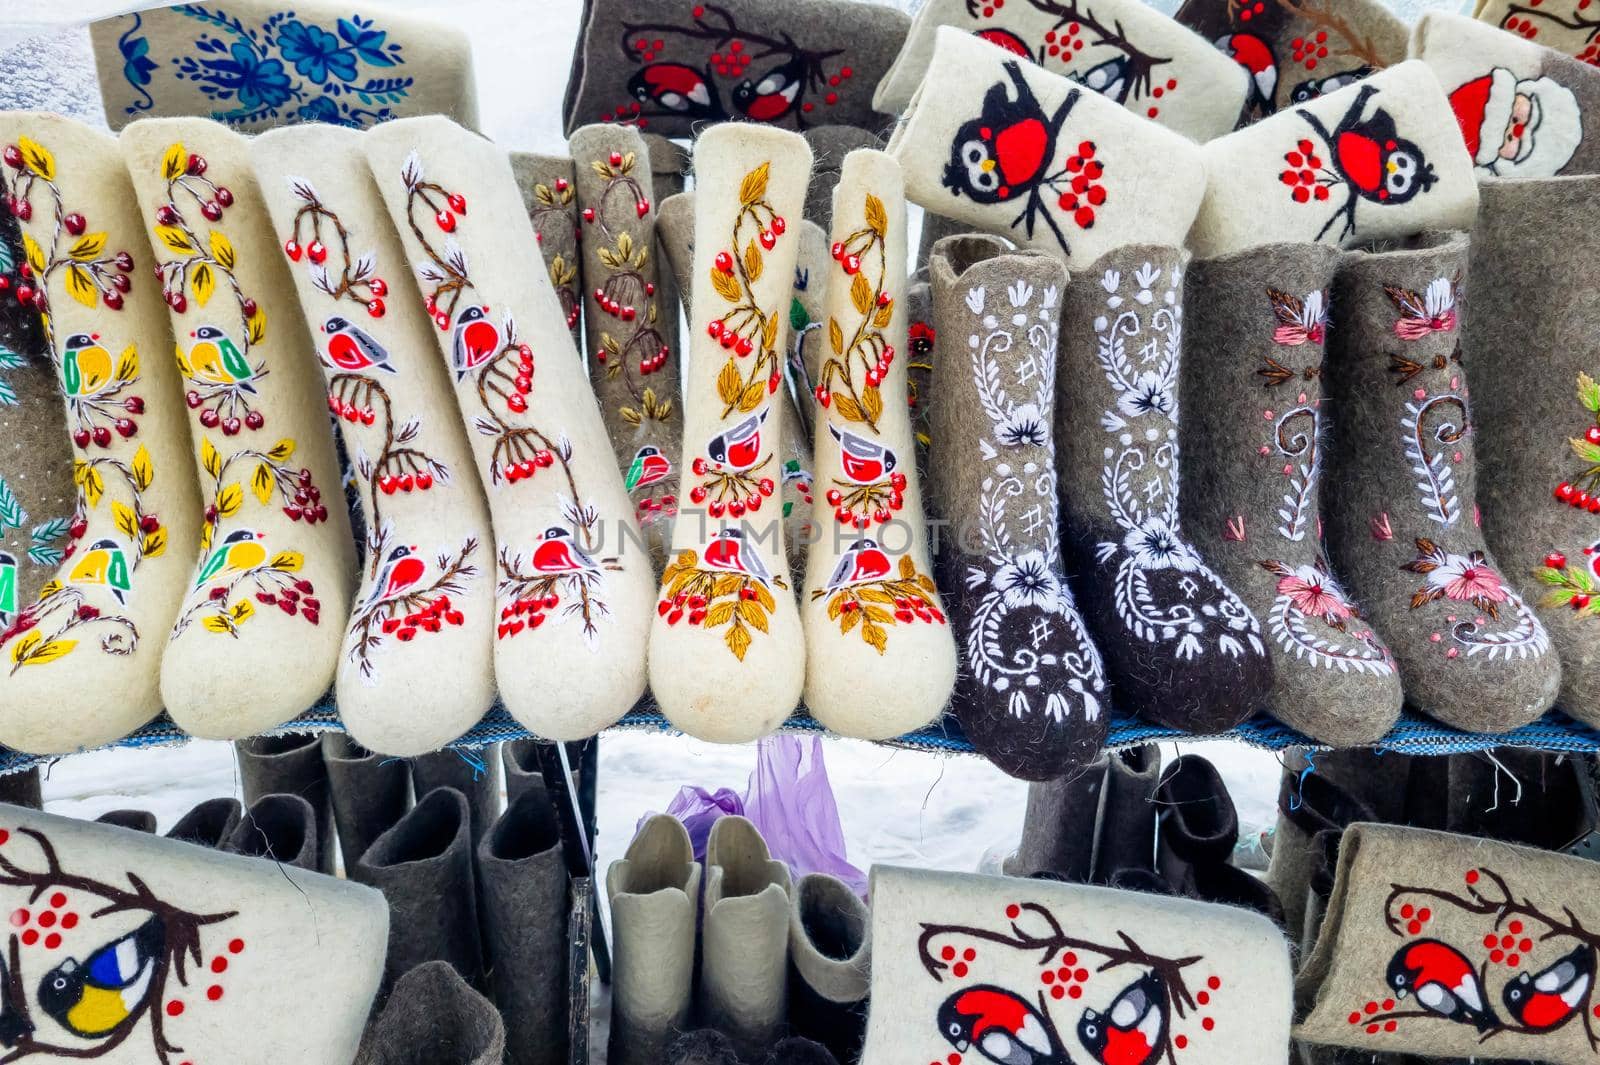 Valenki - traditional Russian winter shoes made of felt